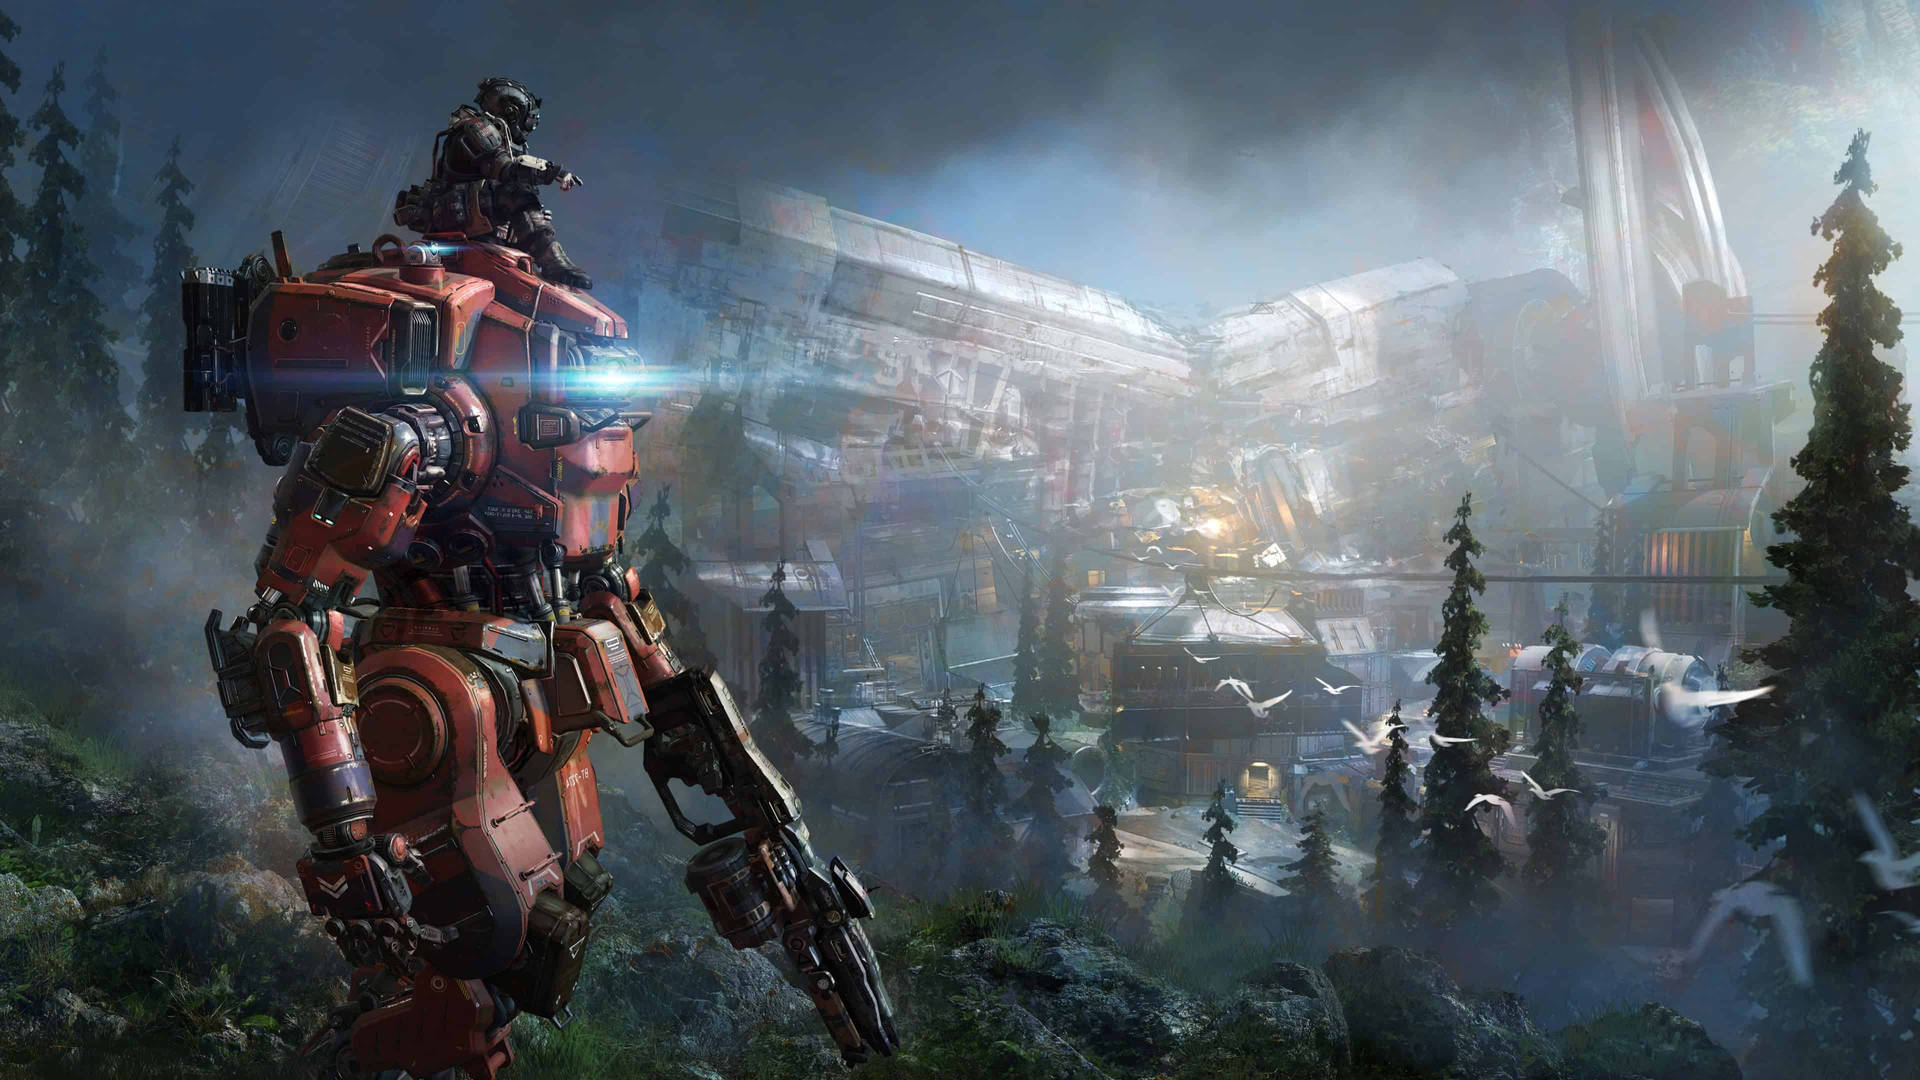 Take Up Arms In The Forests Of Titanfall 2 Background